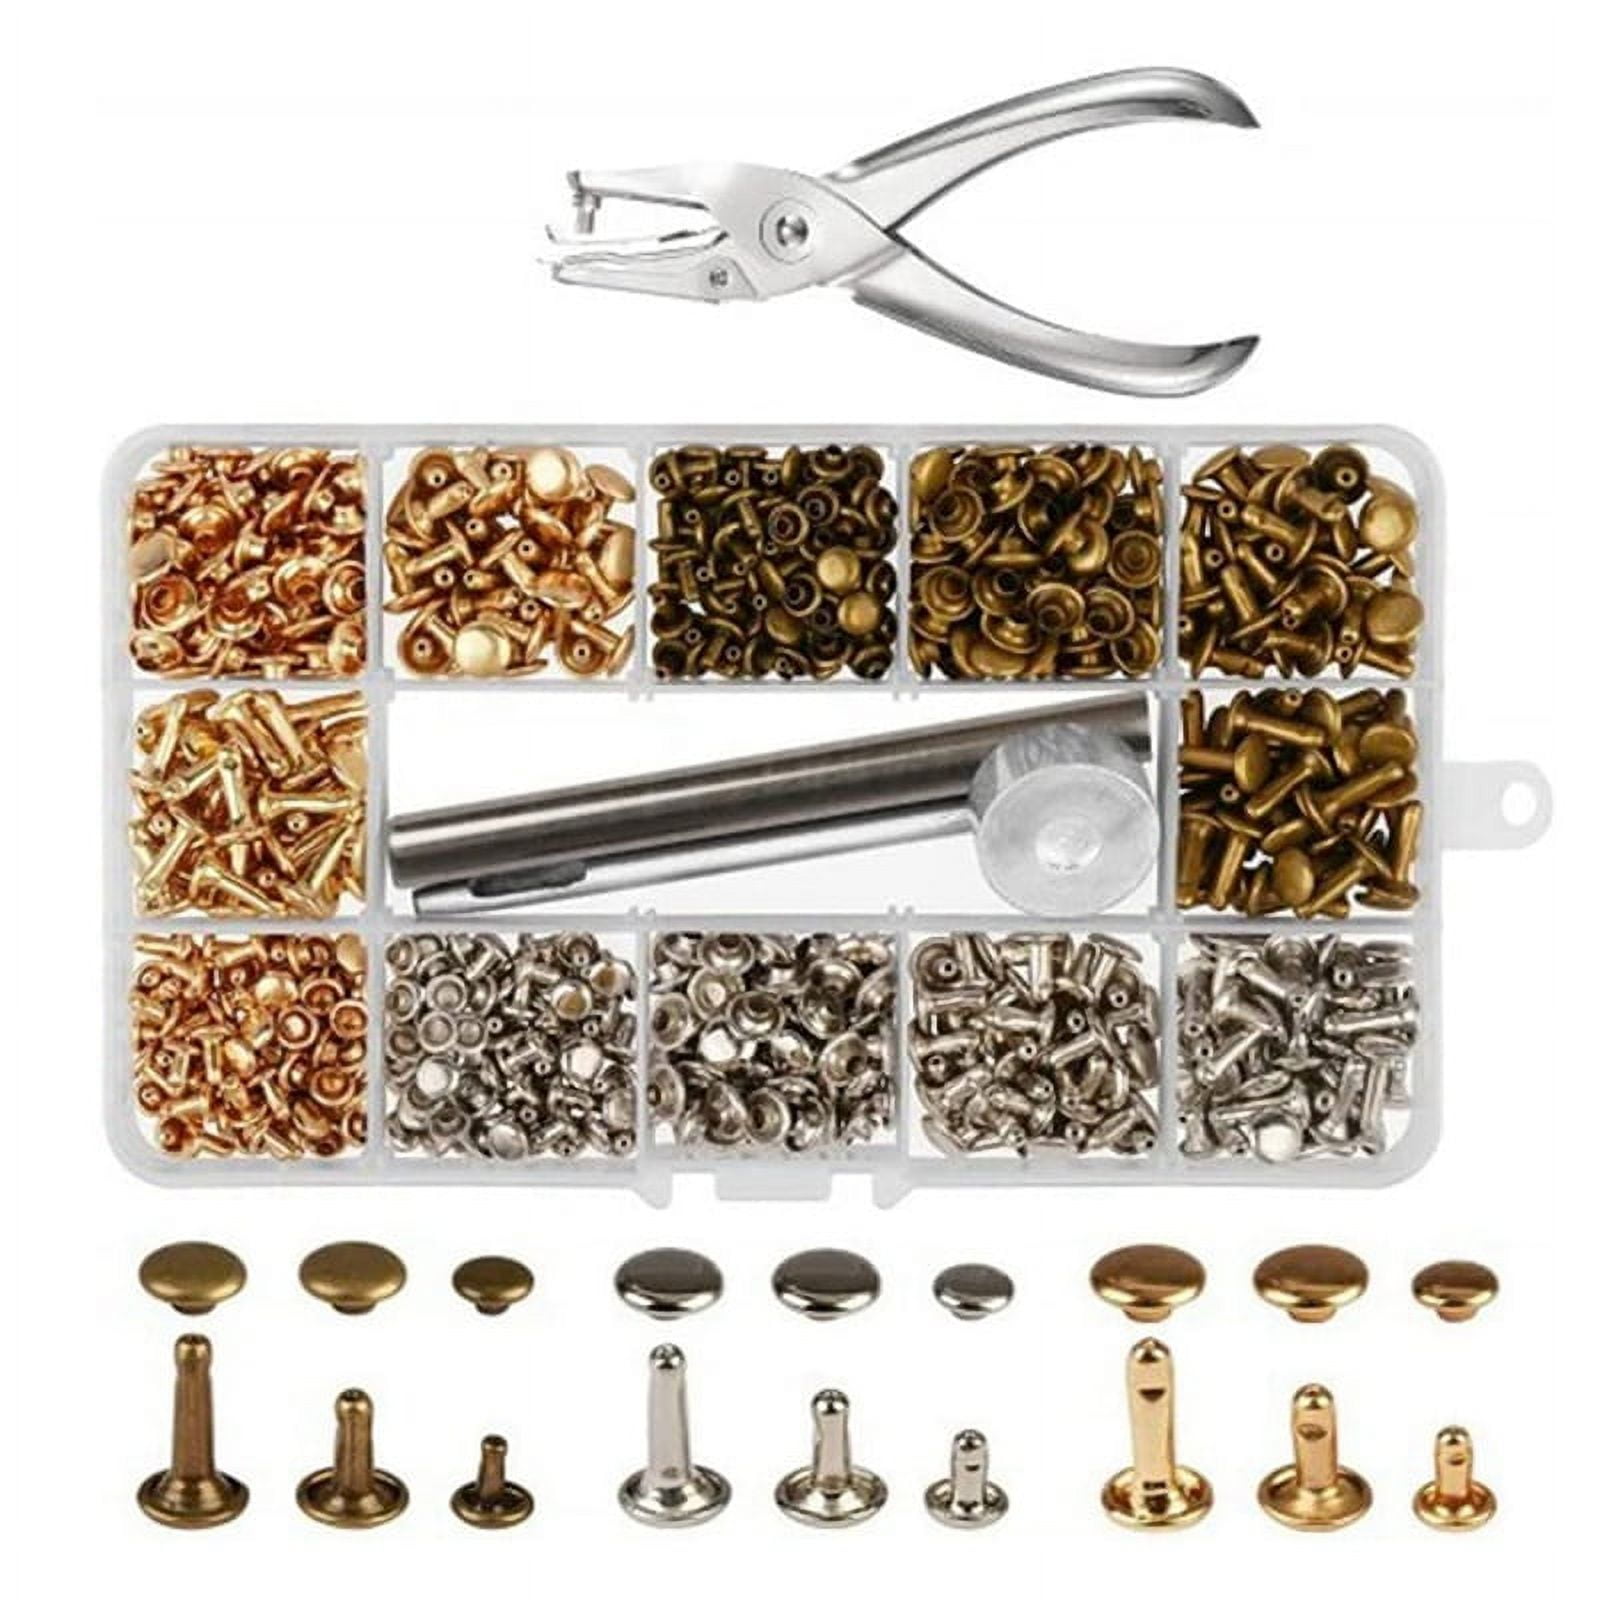 YiChuangXin 300 Sets Silver Stainless Steel Leather Rivets Double Cap Rivet Tubular Metal Studs Repairs Decoration Craft Accessories for Leather Craft Clothes